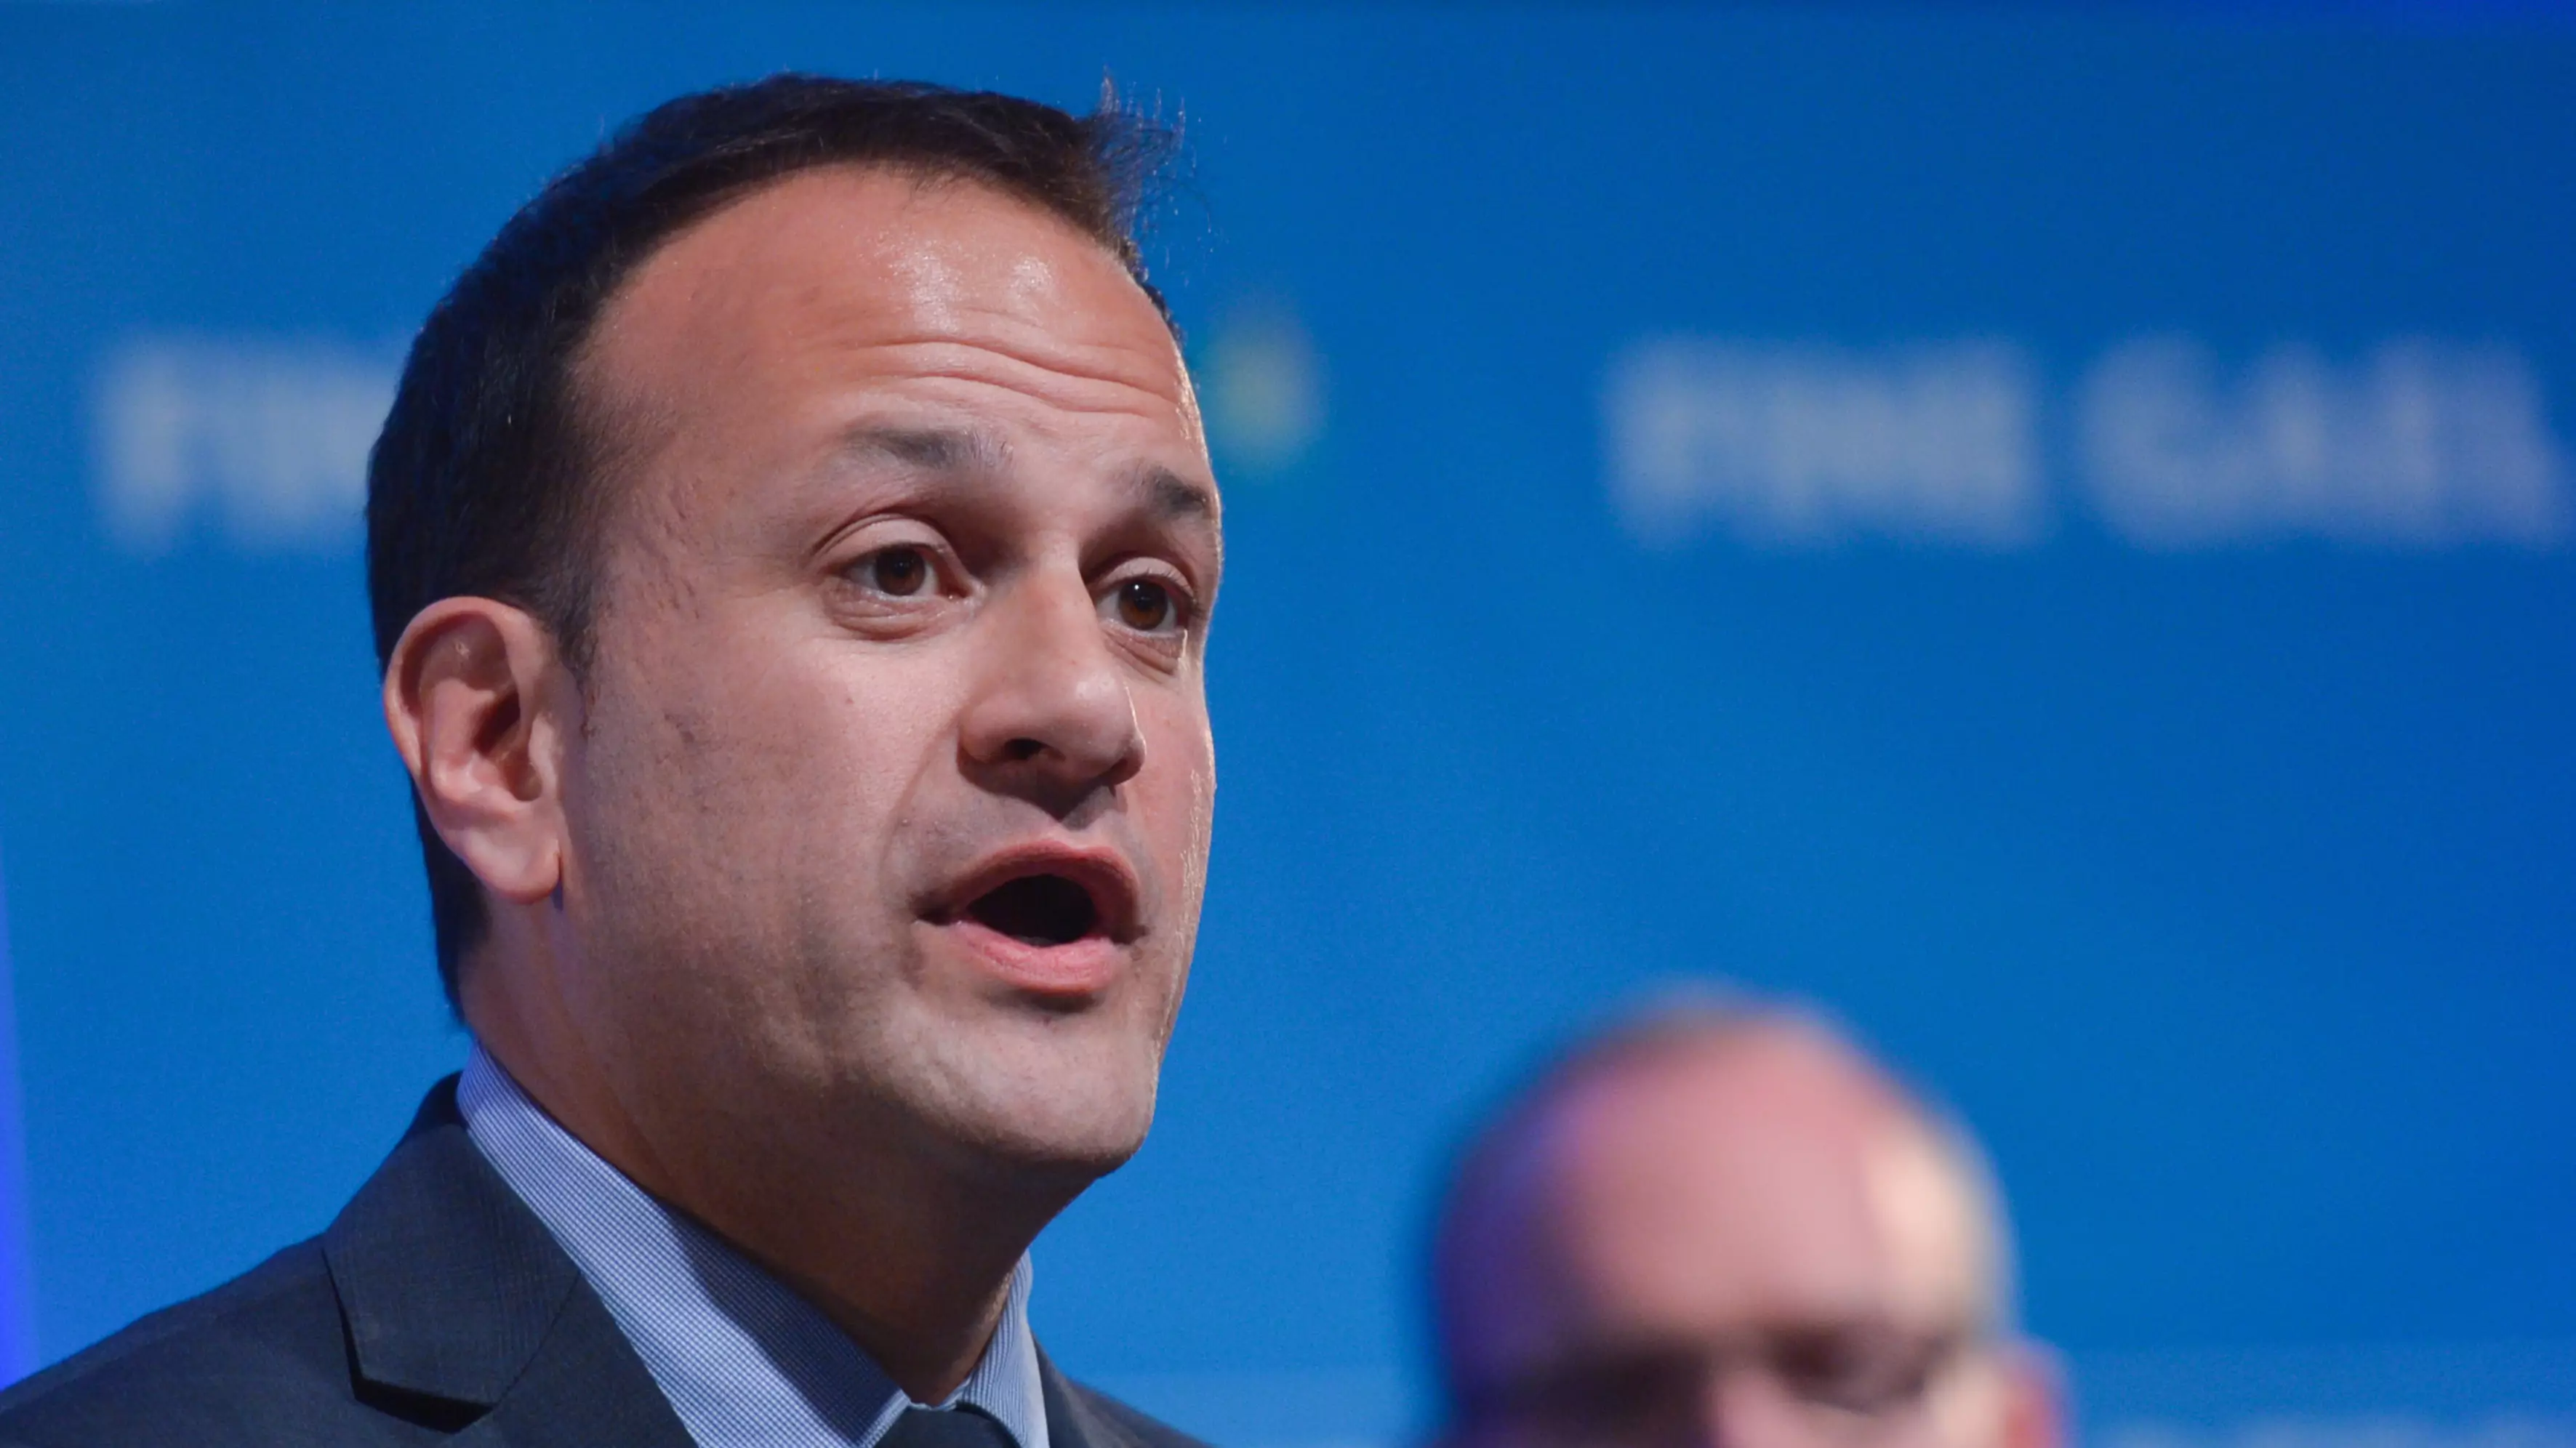 Ireland Welcomes Its First Gay Prime Minister 